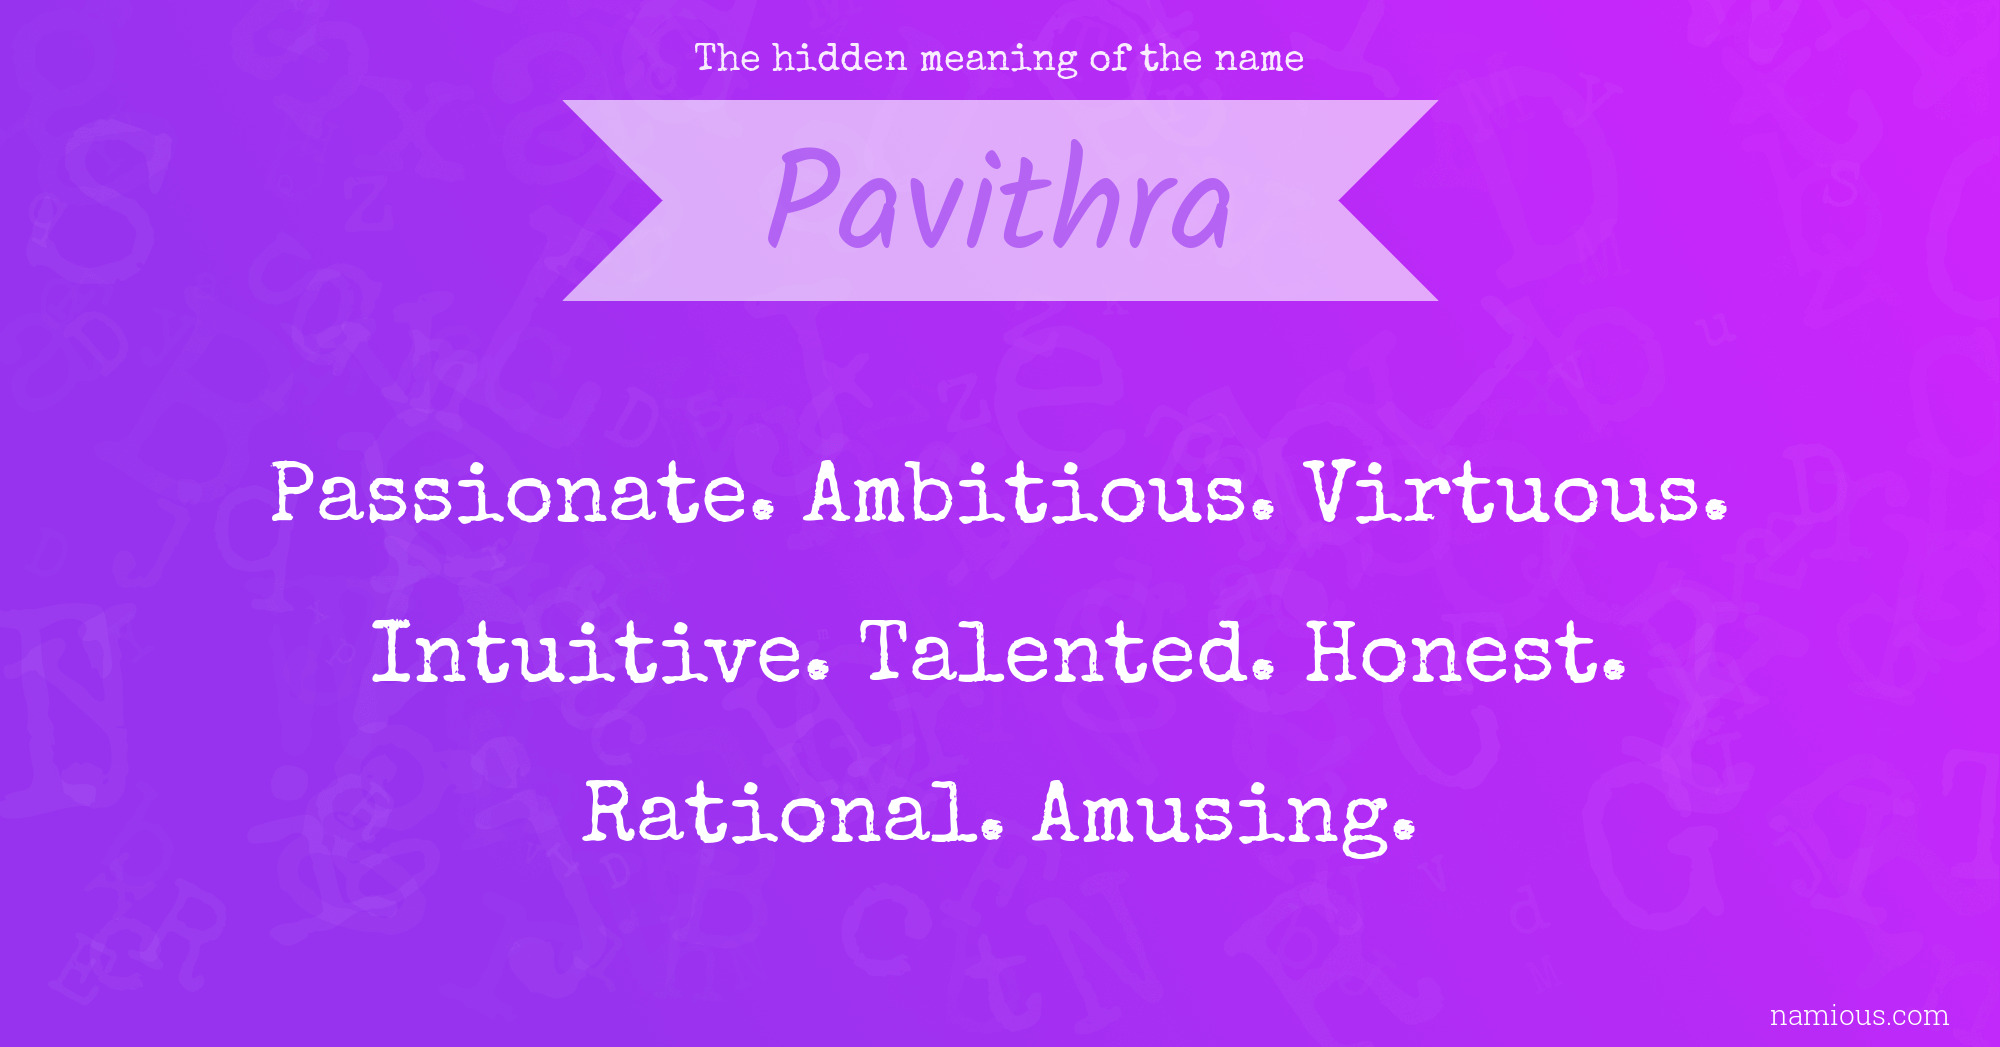 The hidden meaning of the name Pavithra